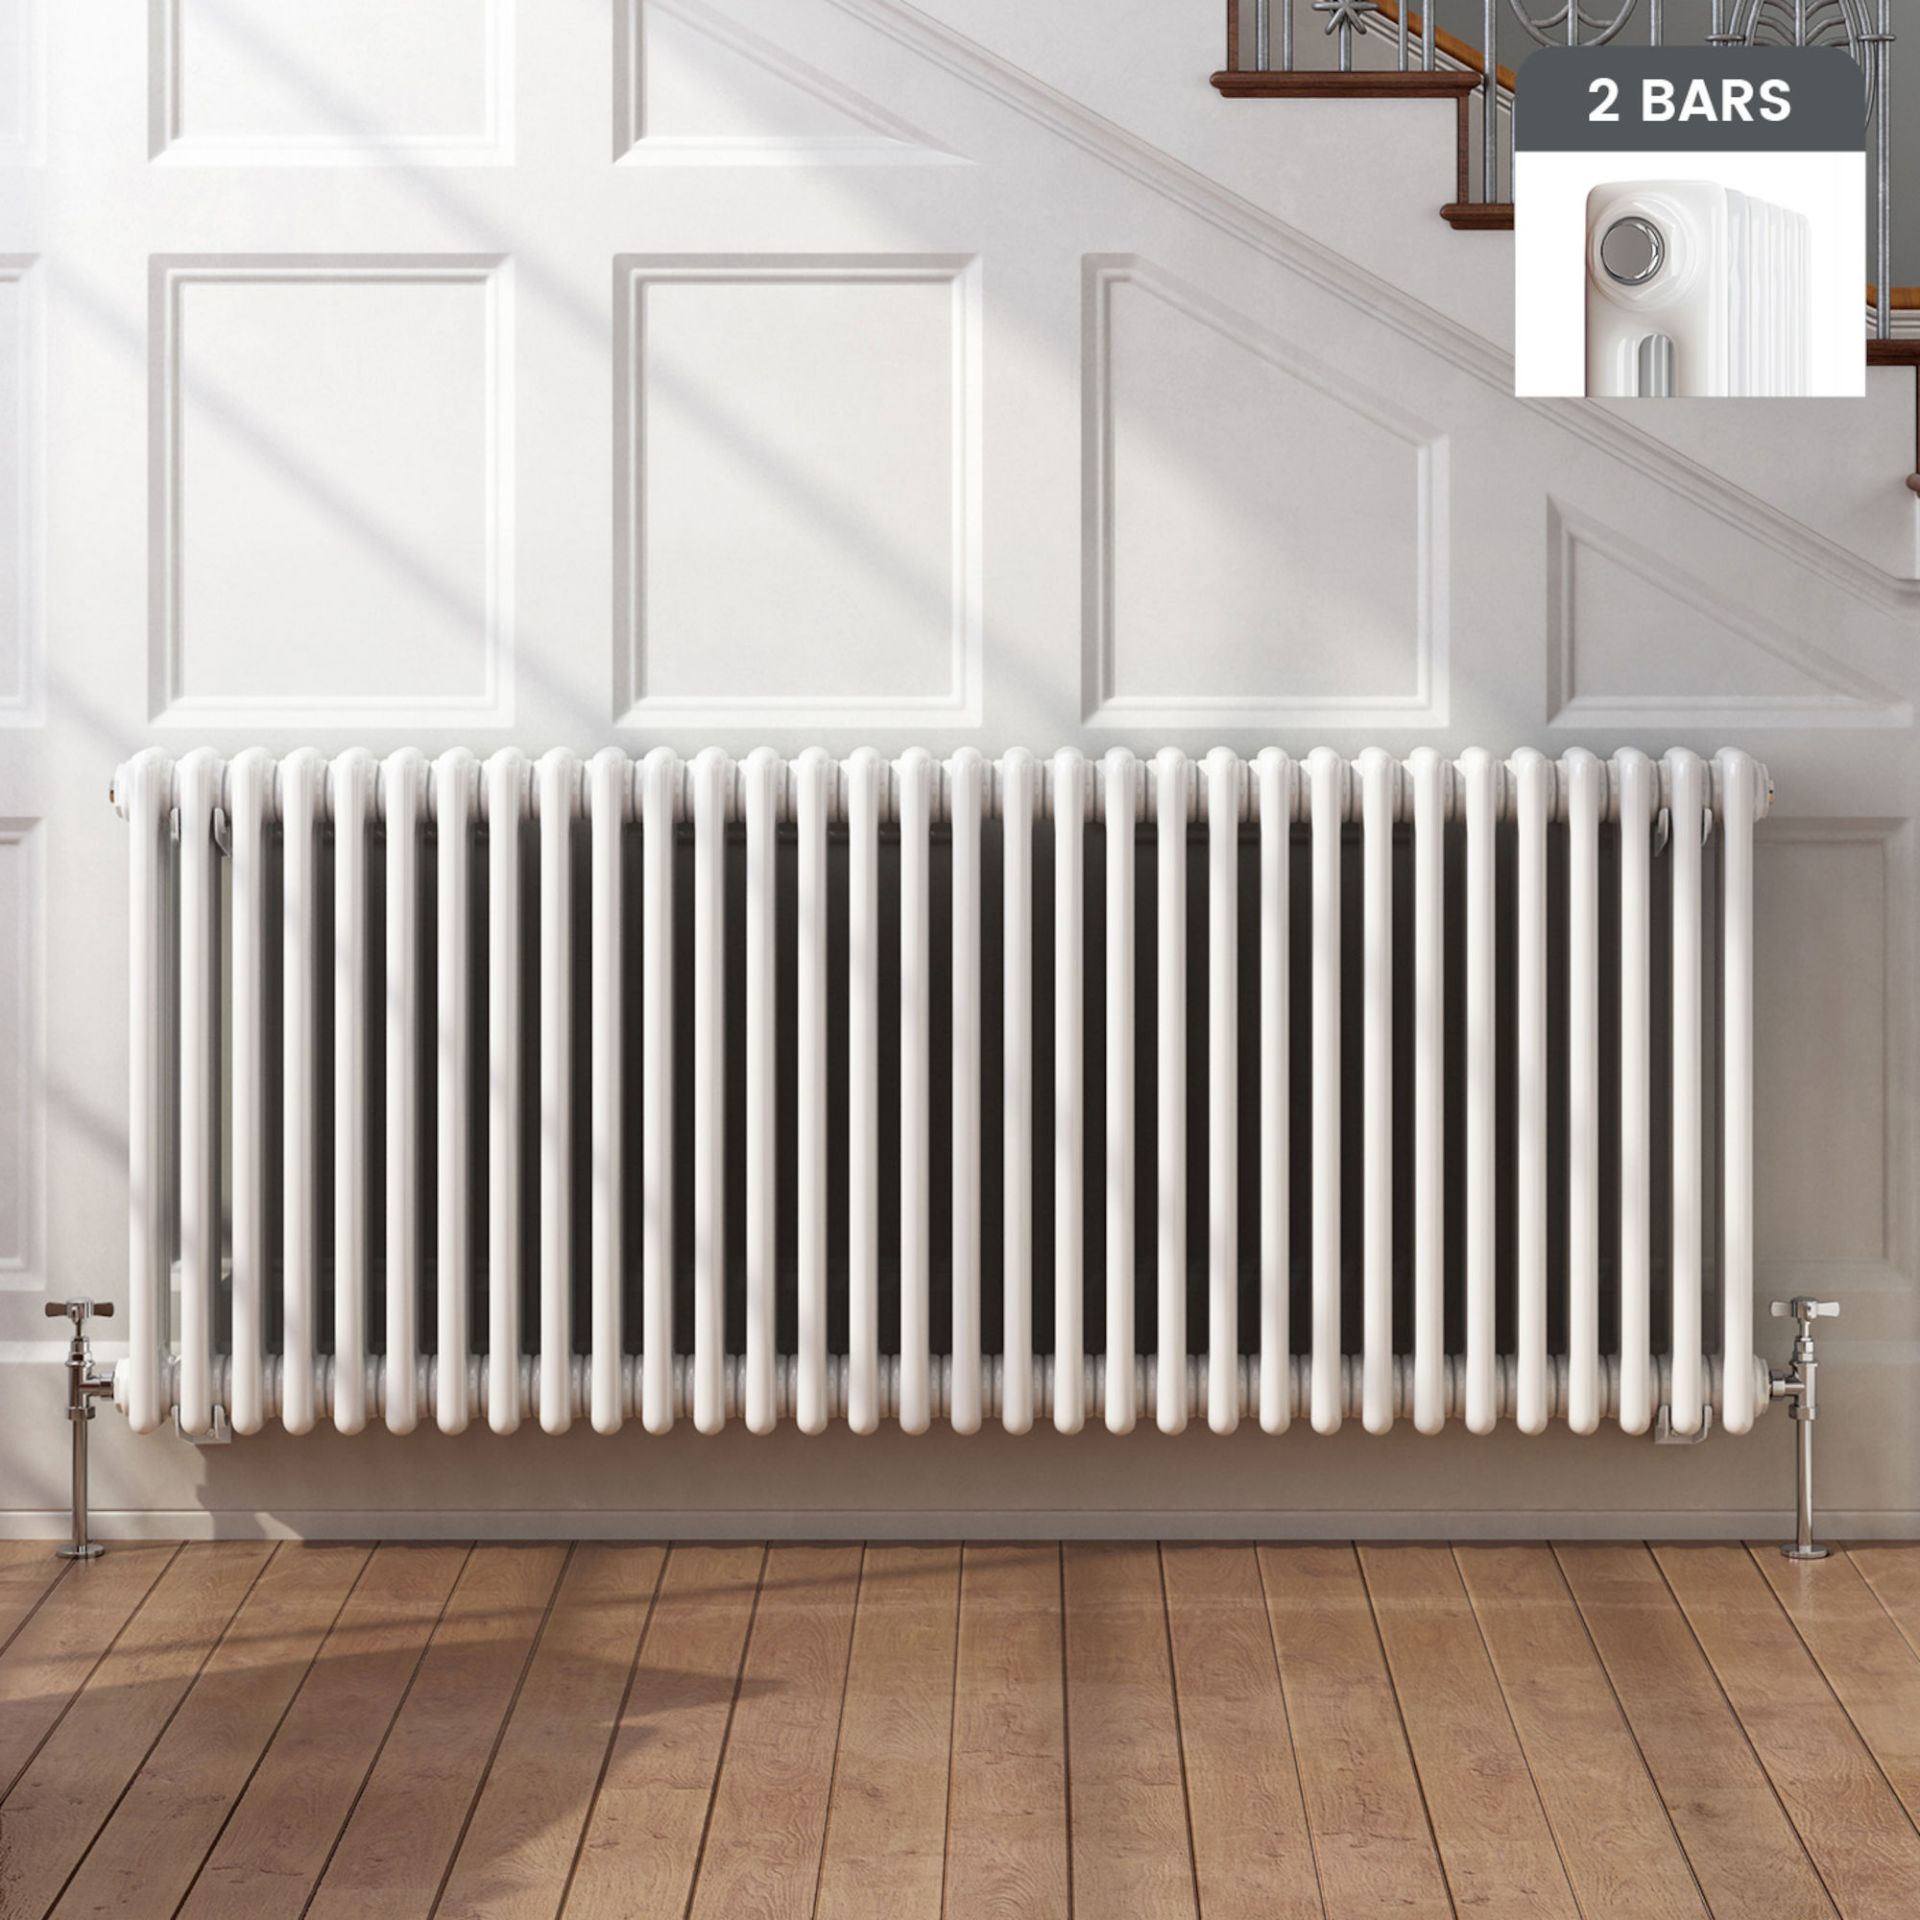 (DW37) 600x1458mm White Double Panel Horizontal Colosseum Traditional Radiator. RRP £552.99. F...